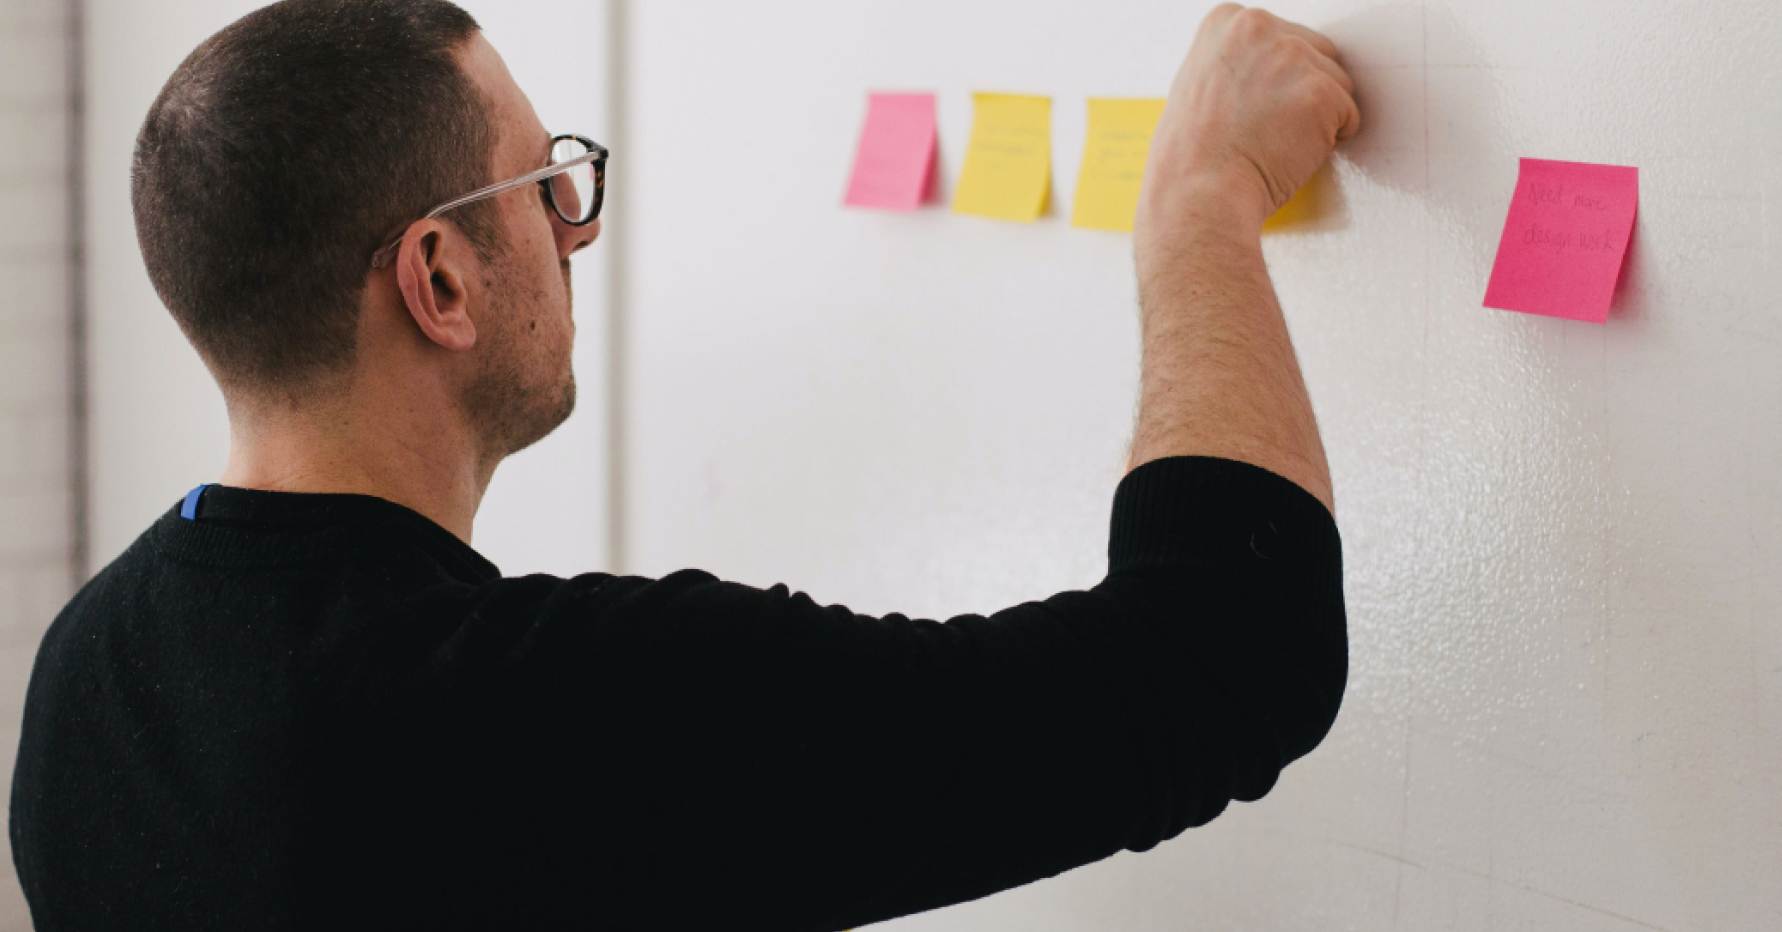 Man placing sticky notes on a whiteboard